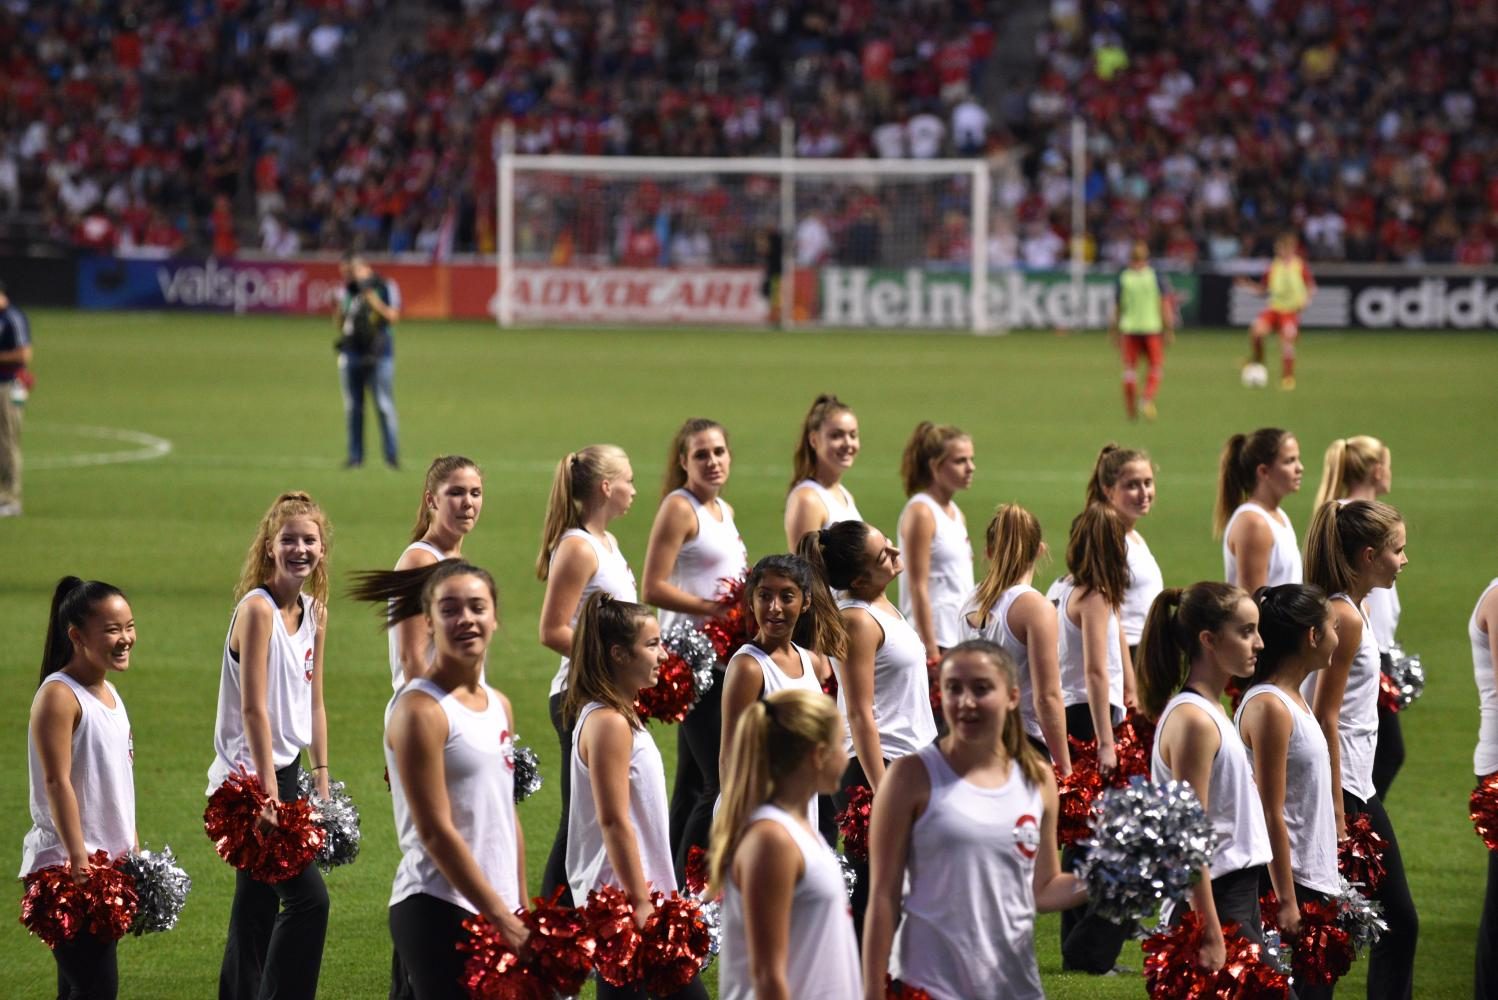 The+poms+team+gets+ready+to+perform+in+front+of+large+crowd+at+Toyota+Park+during+the+halftime+Chicago+Fire+game.+